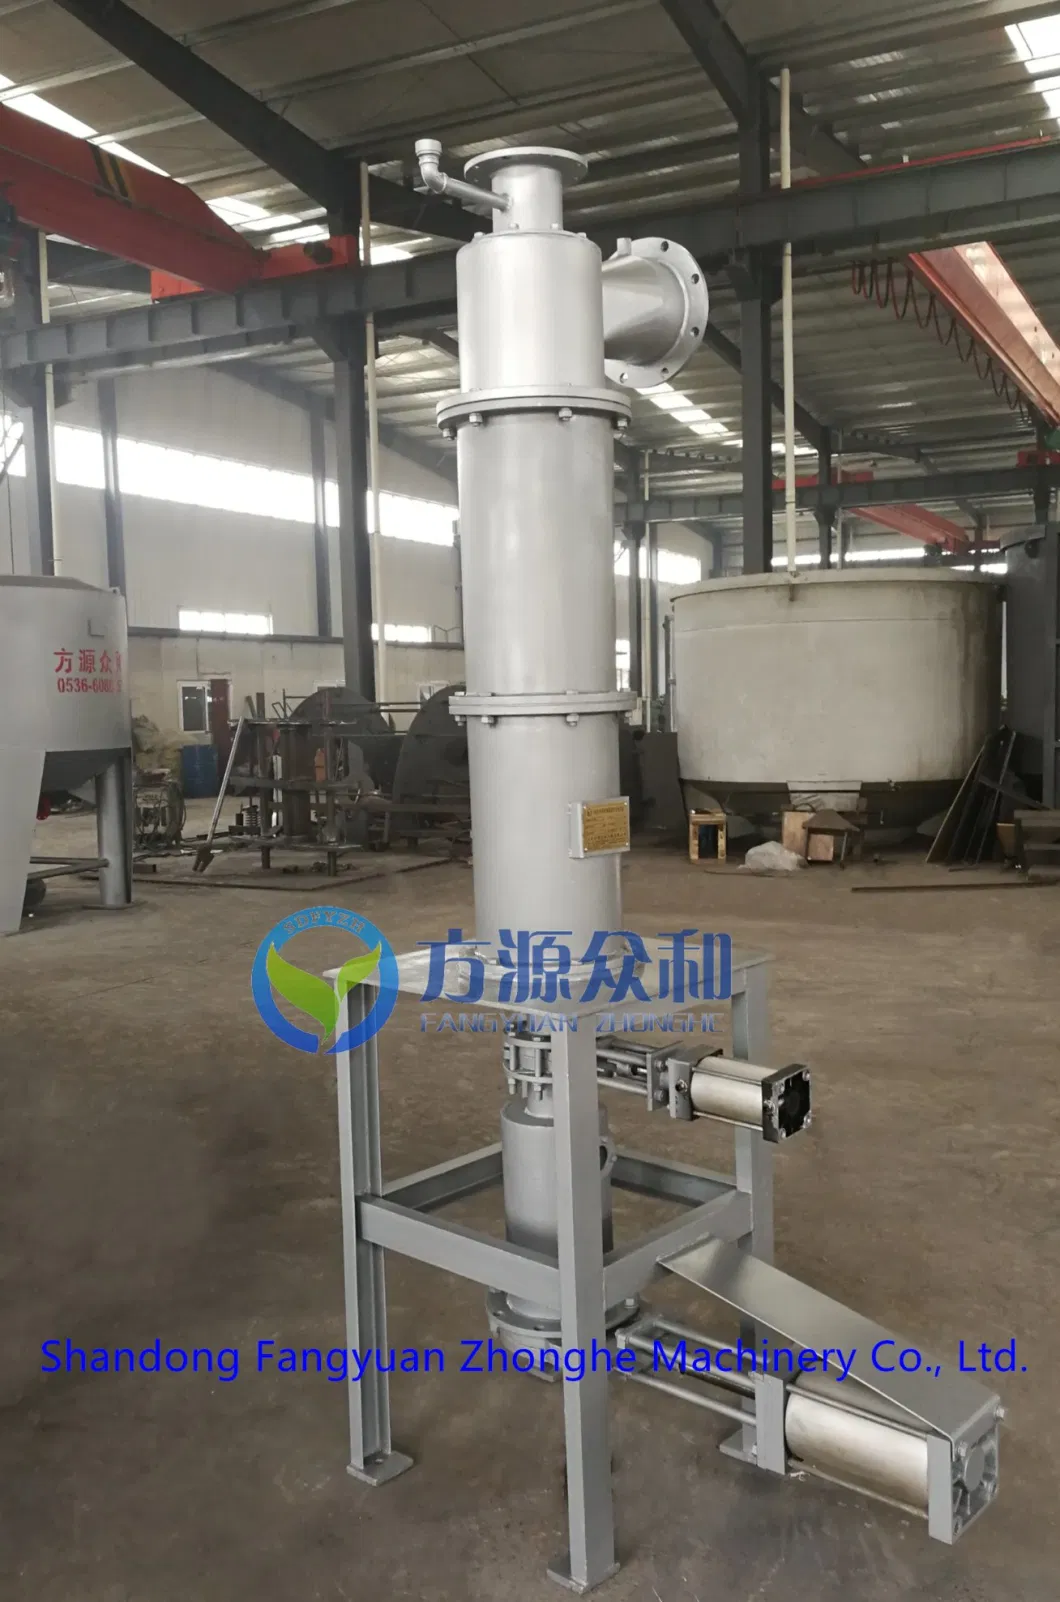 High Consistency Sand Remover for Remove The Heavy Impurities